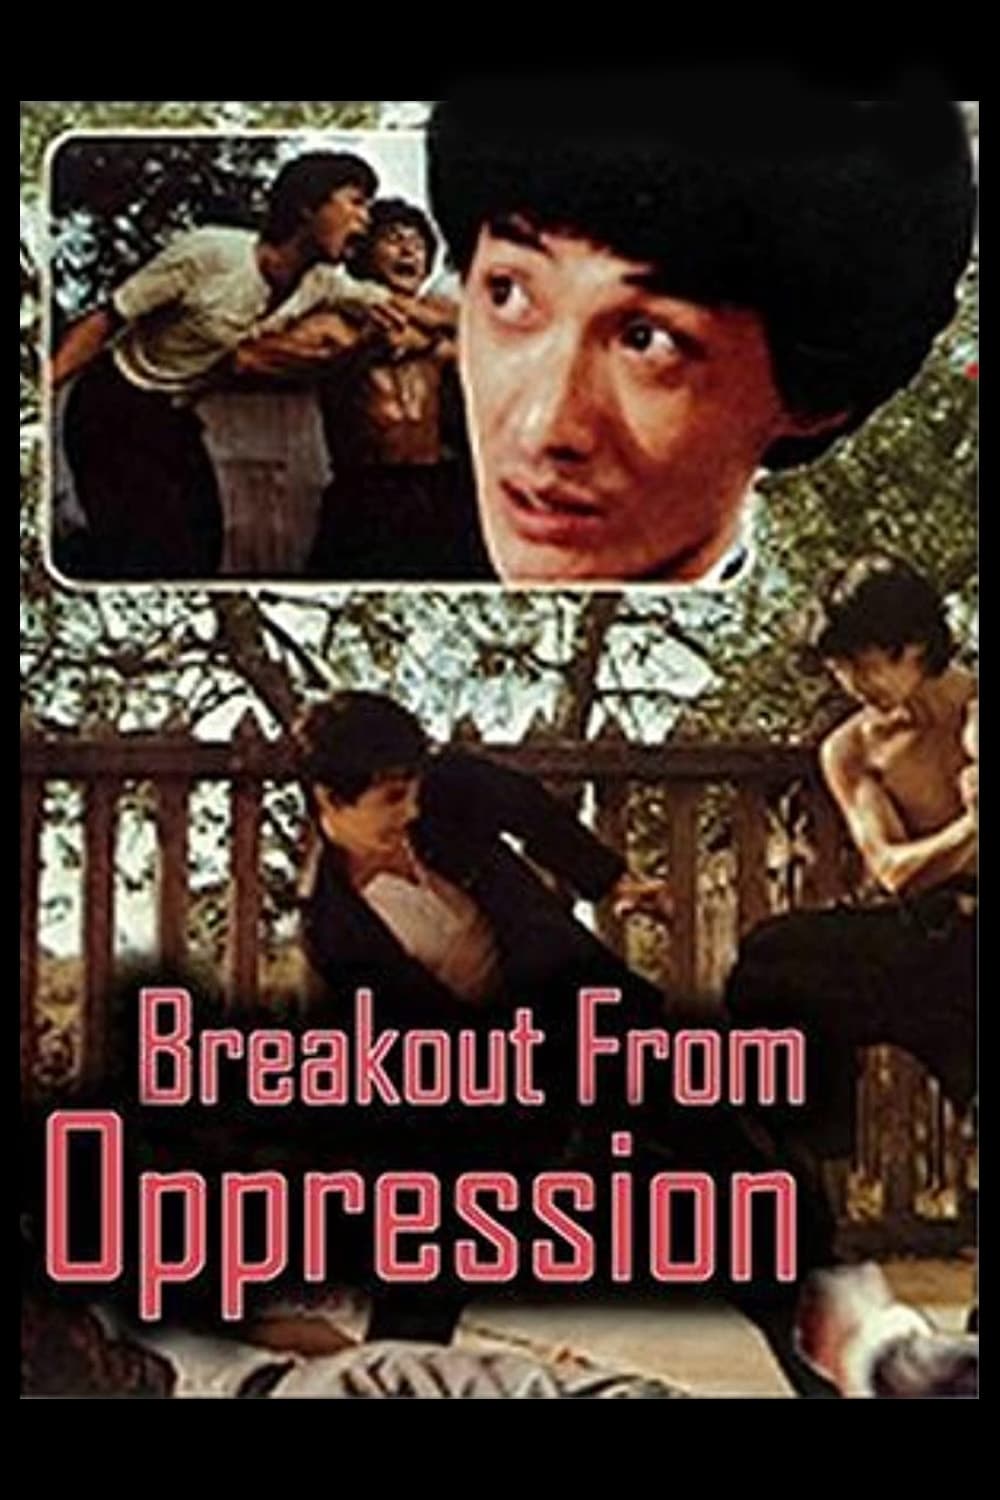 Breakout from Oppression (1978)